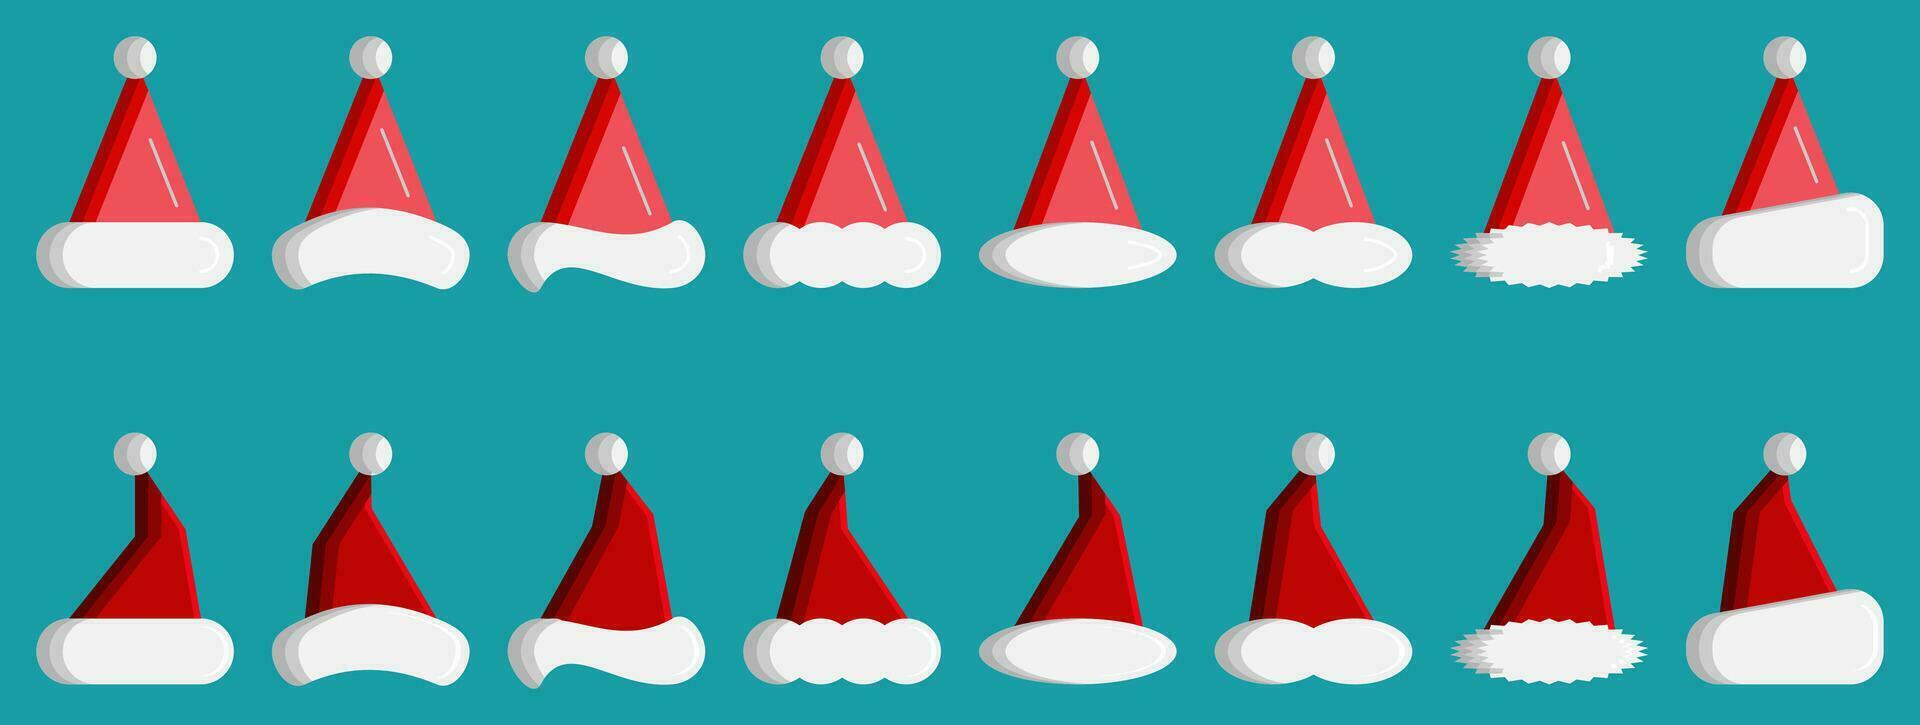 santa or christmas hat icon set. simple vector for Christmas holiday ornament designs such as greeting cards, banners, flyers, social media.